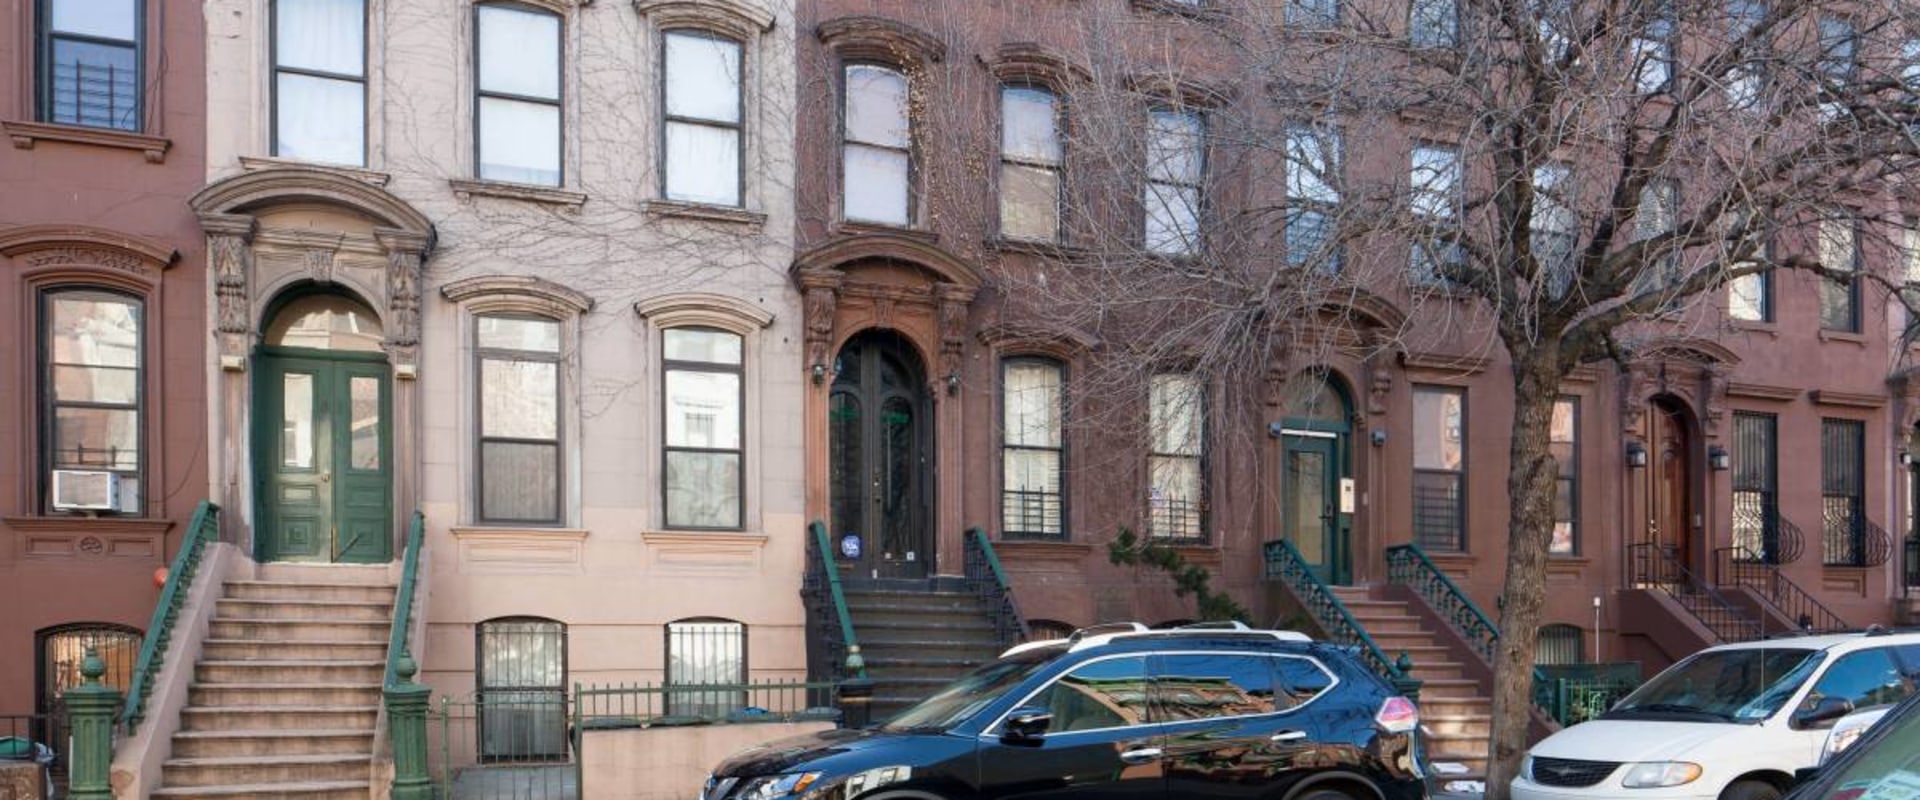 Where Did Langston Hughes Live in New York?